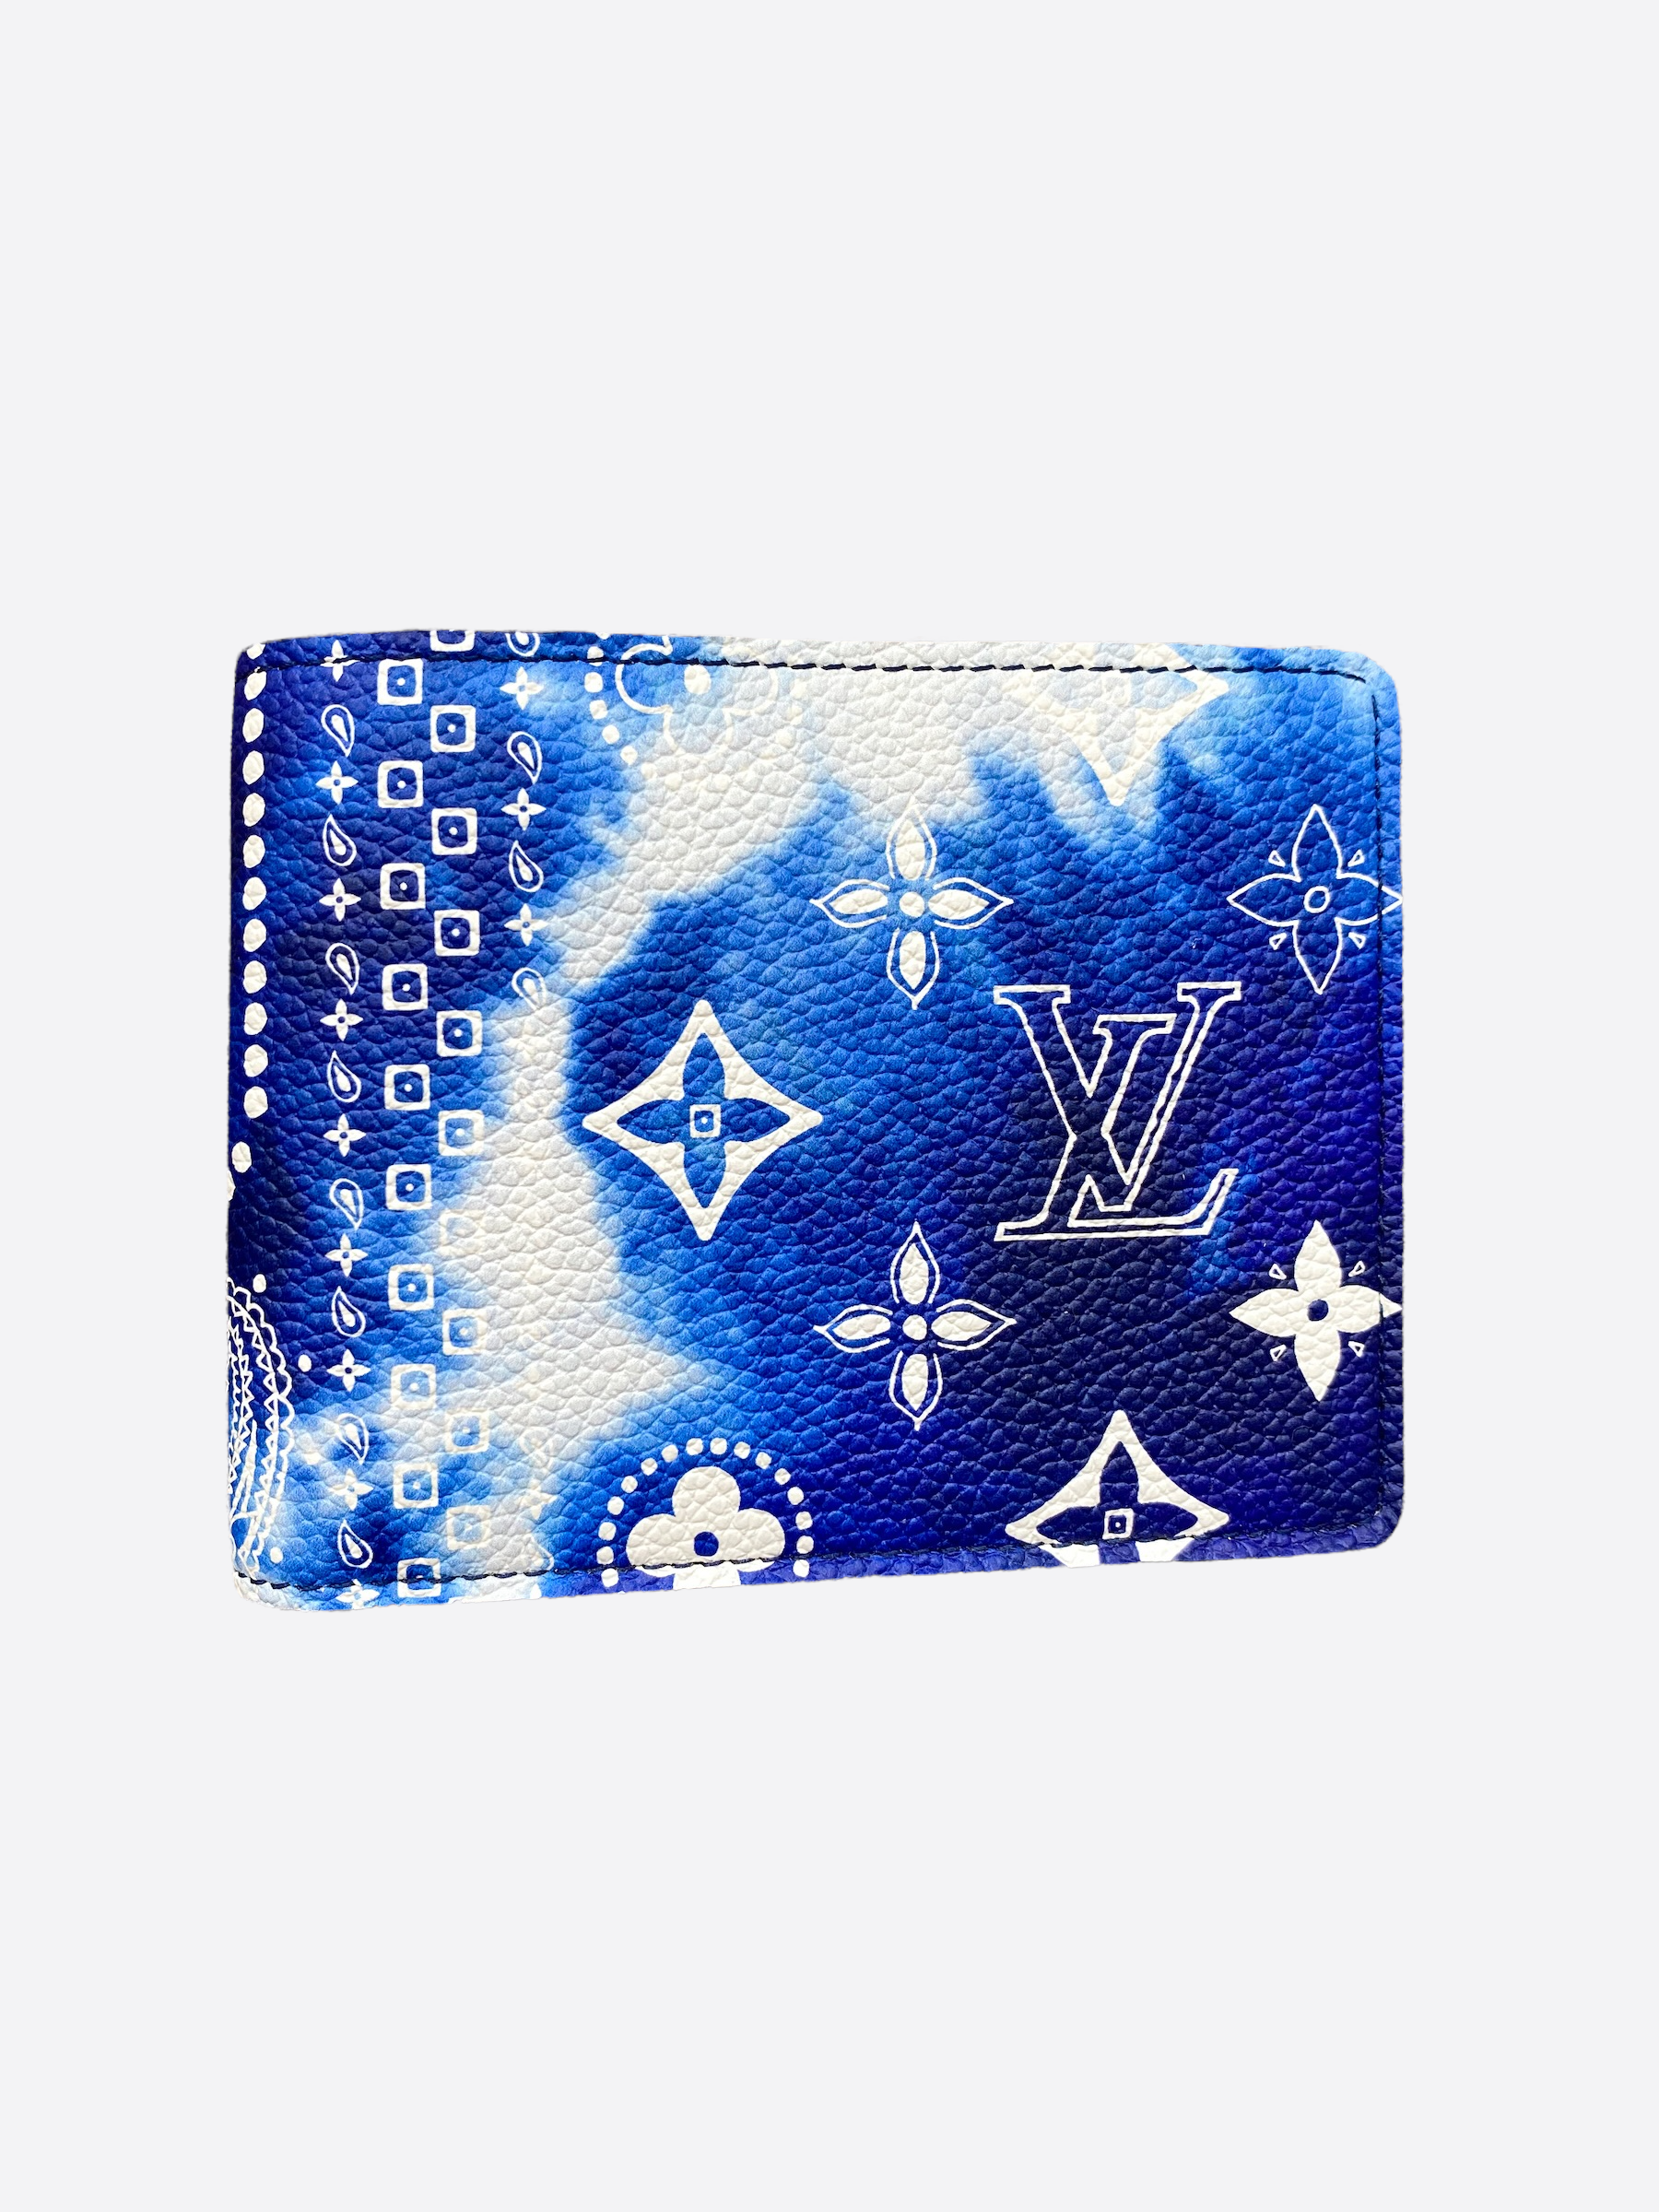 Louis Vuitton Virgil Abloh Blue & Green Monogram Illusion Leather Pocket  Organizer, 2022 Available For Immediate Sale At Sotheby's